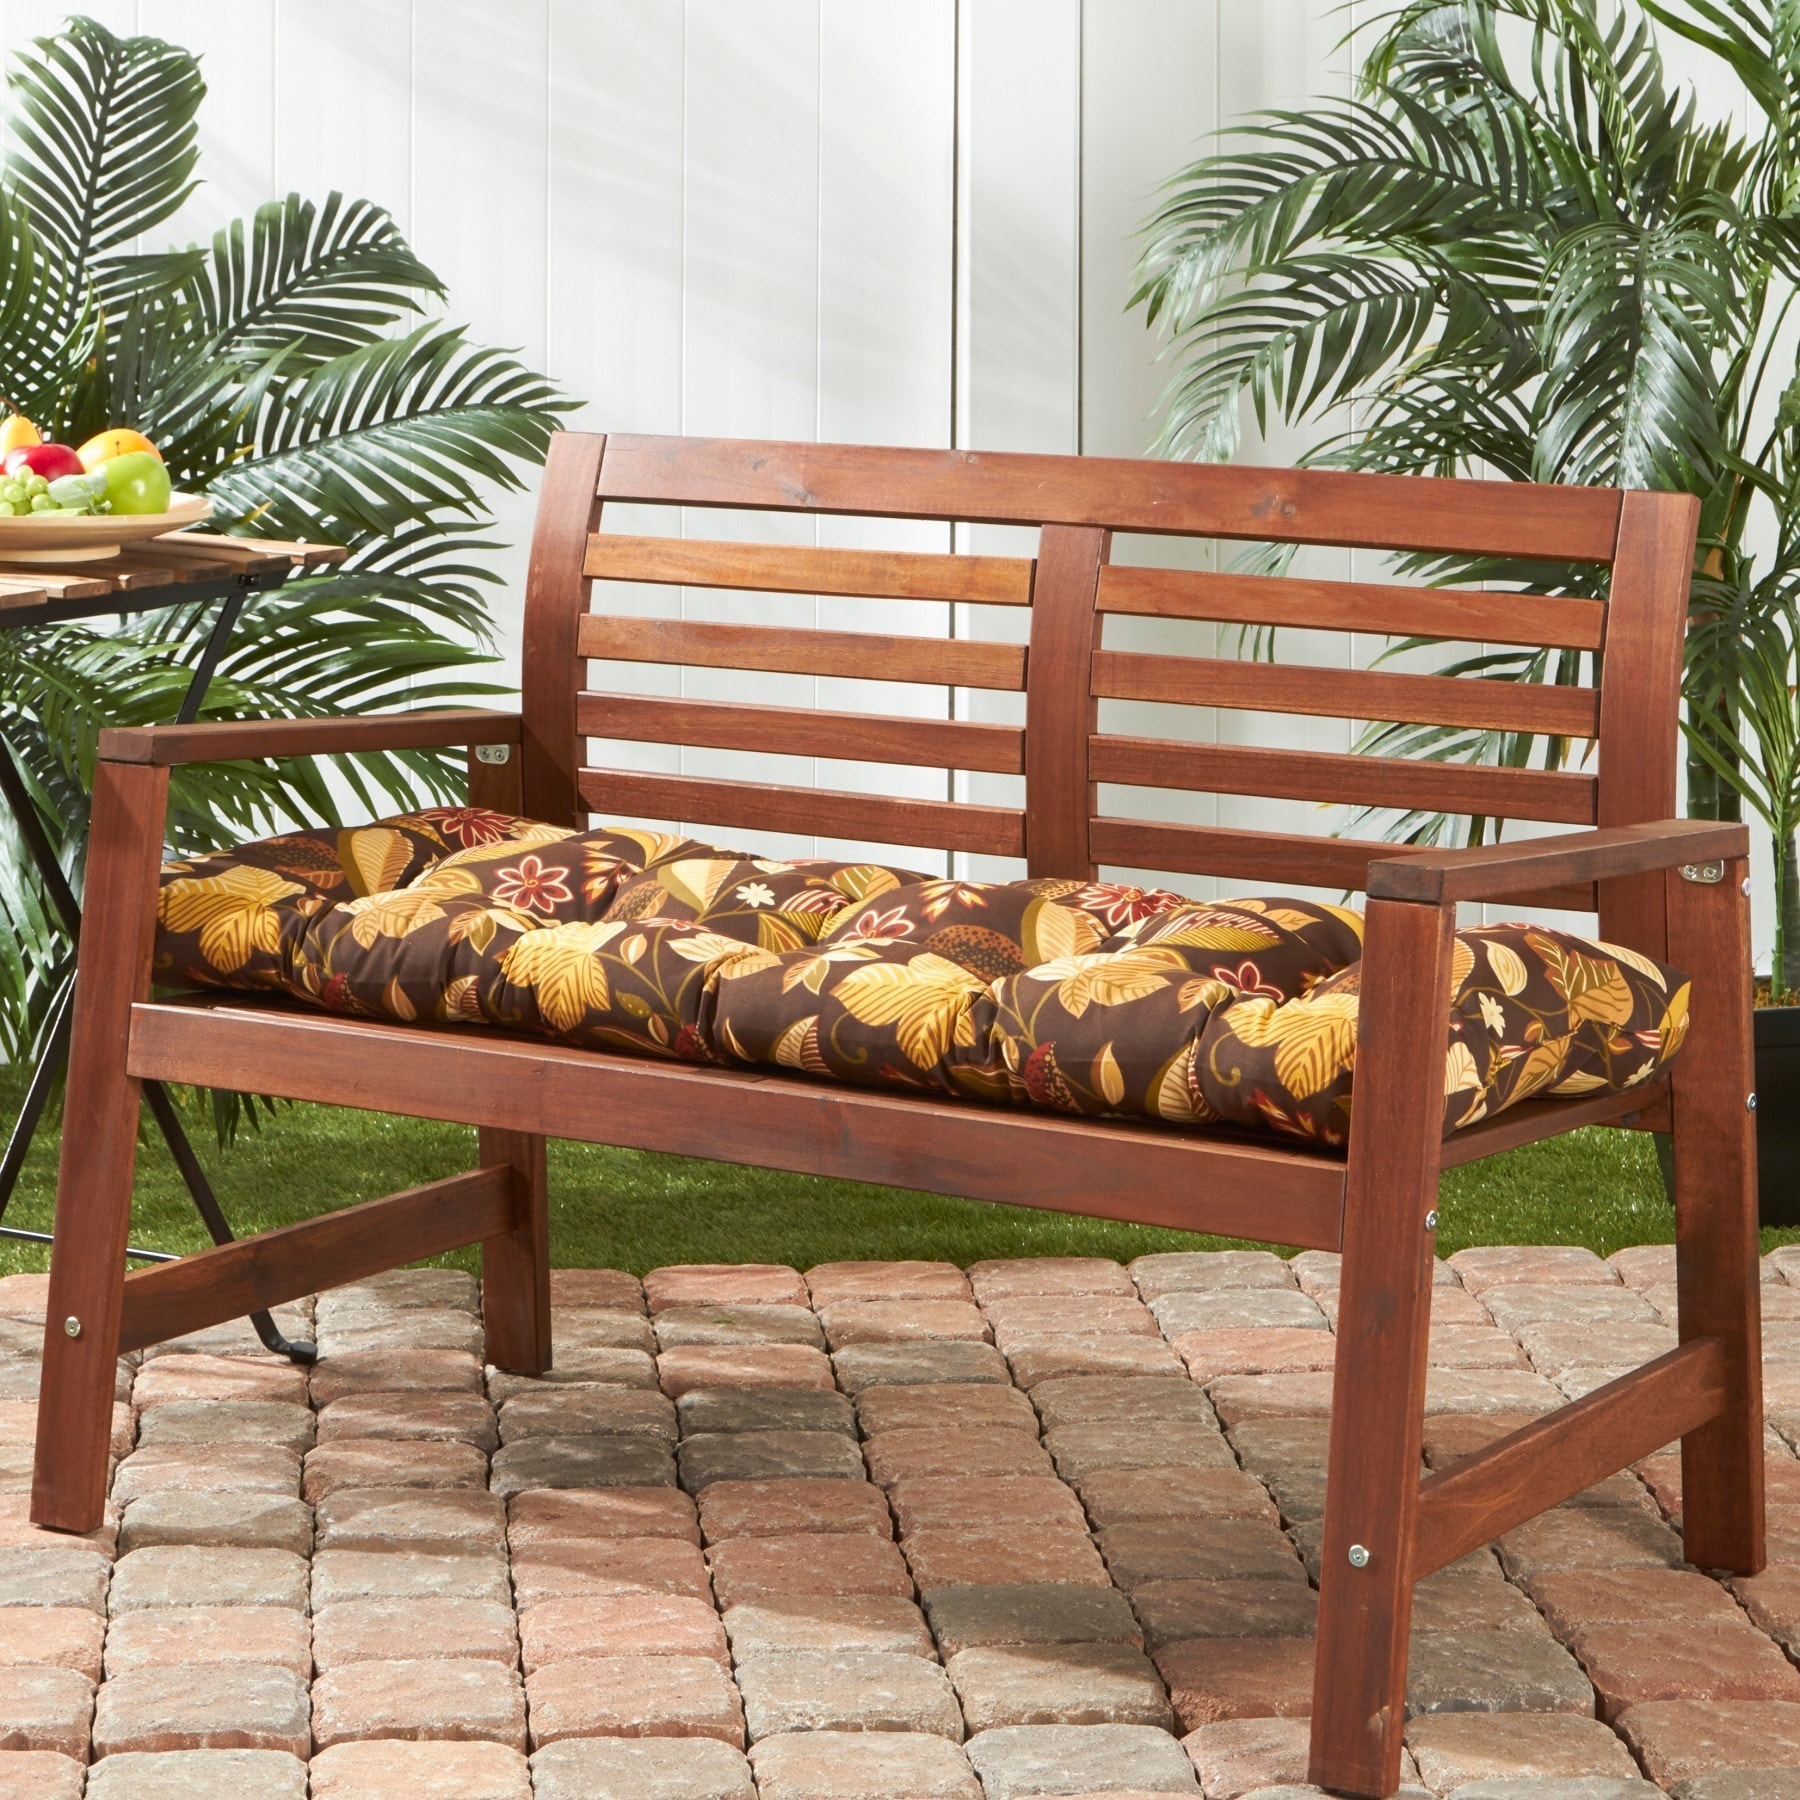 Shop Greendale Home Fashions Outdoor Timberland Floral Bench